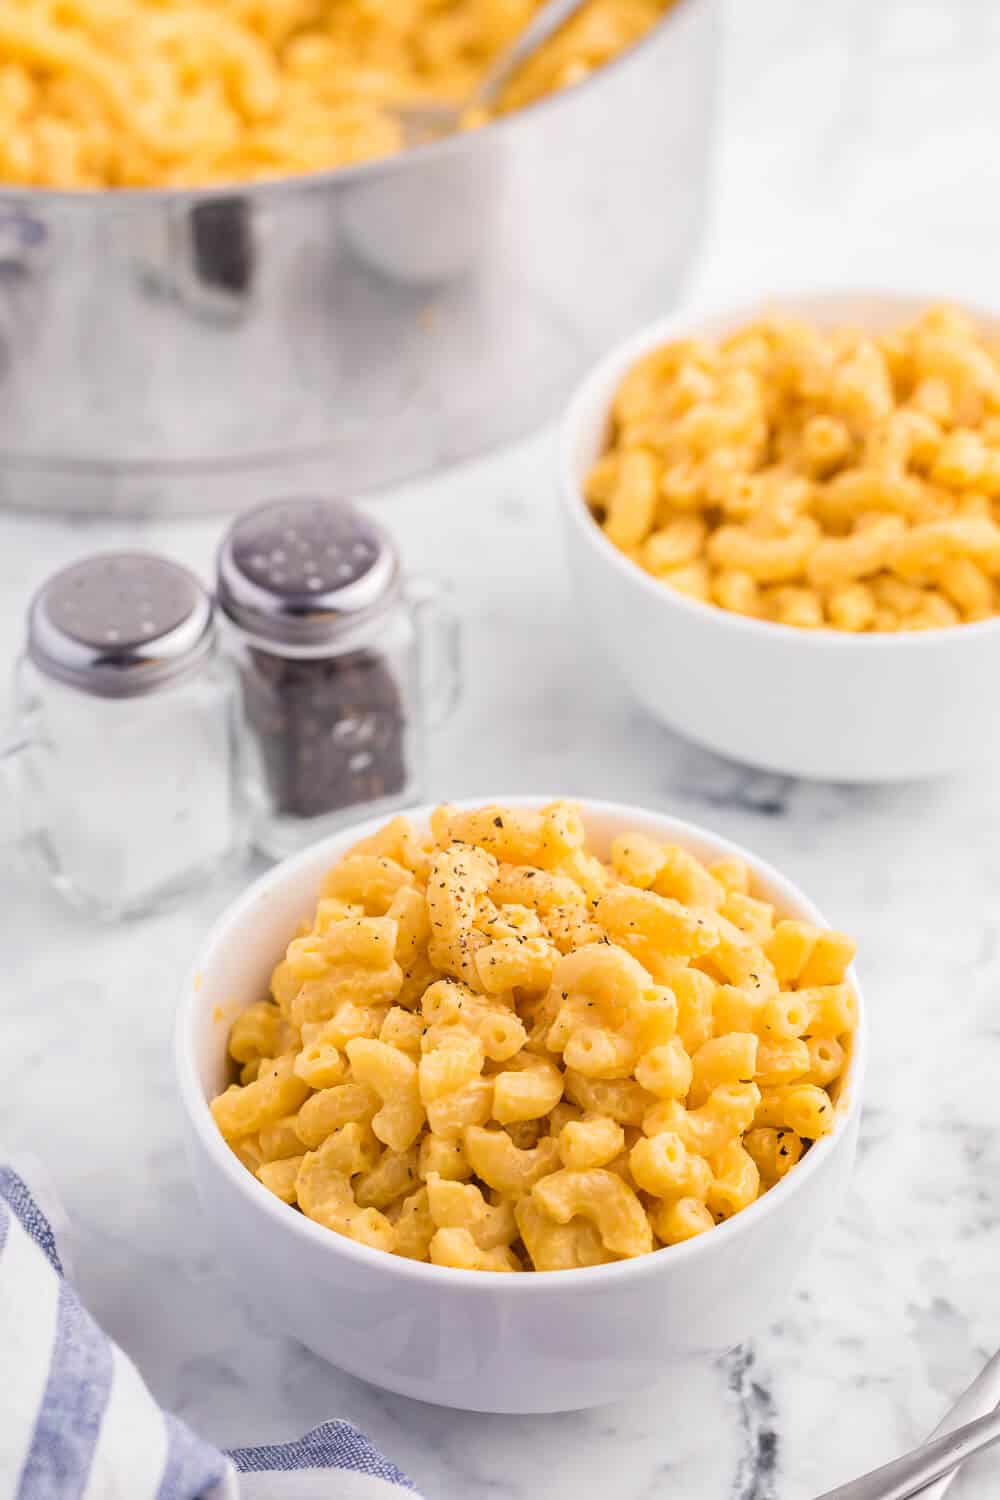 Stovetop Mac & Cheese - Who doesn't love mac and cheese? This quick, creamy and cheesy dish is so simple to make, you will never want mac and cheese from a box again!